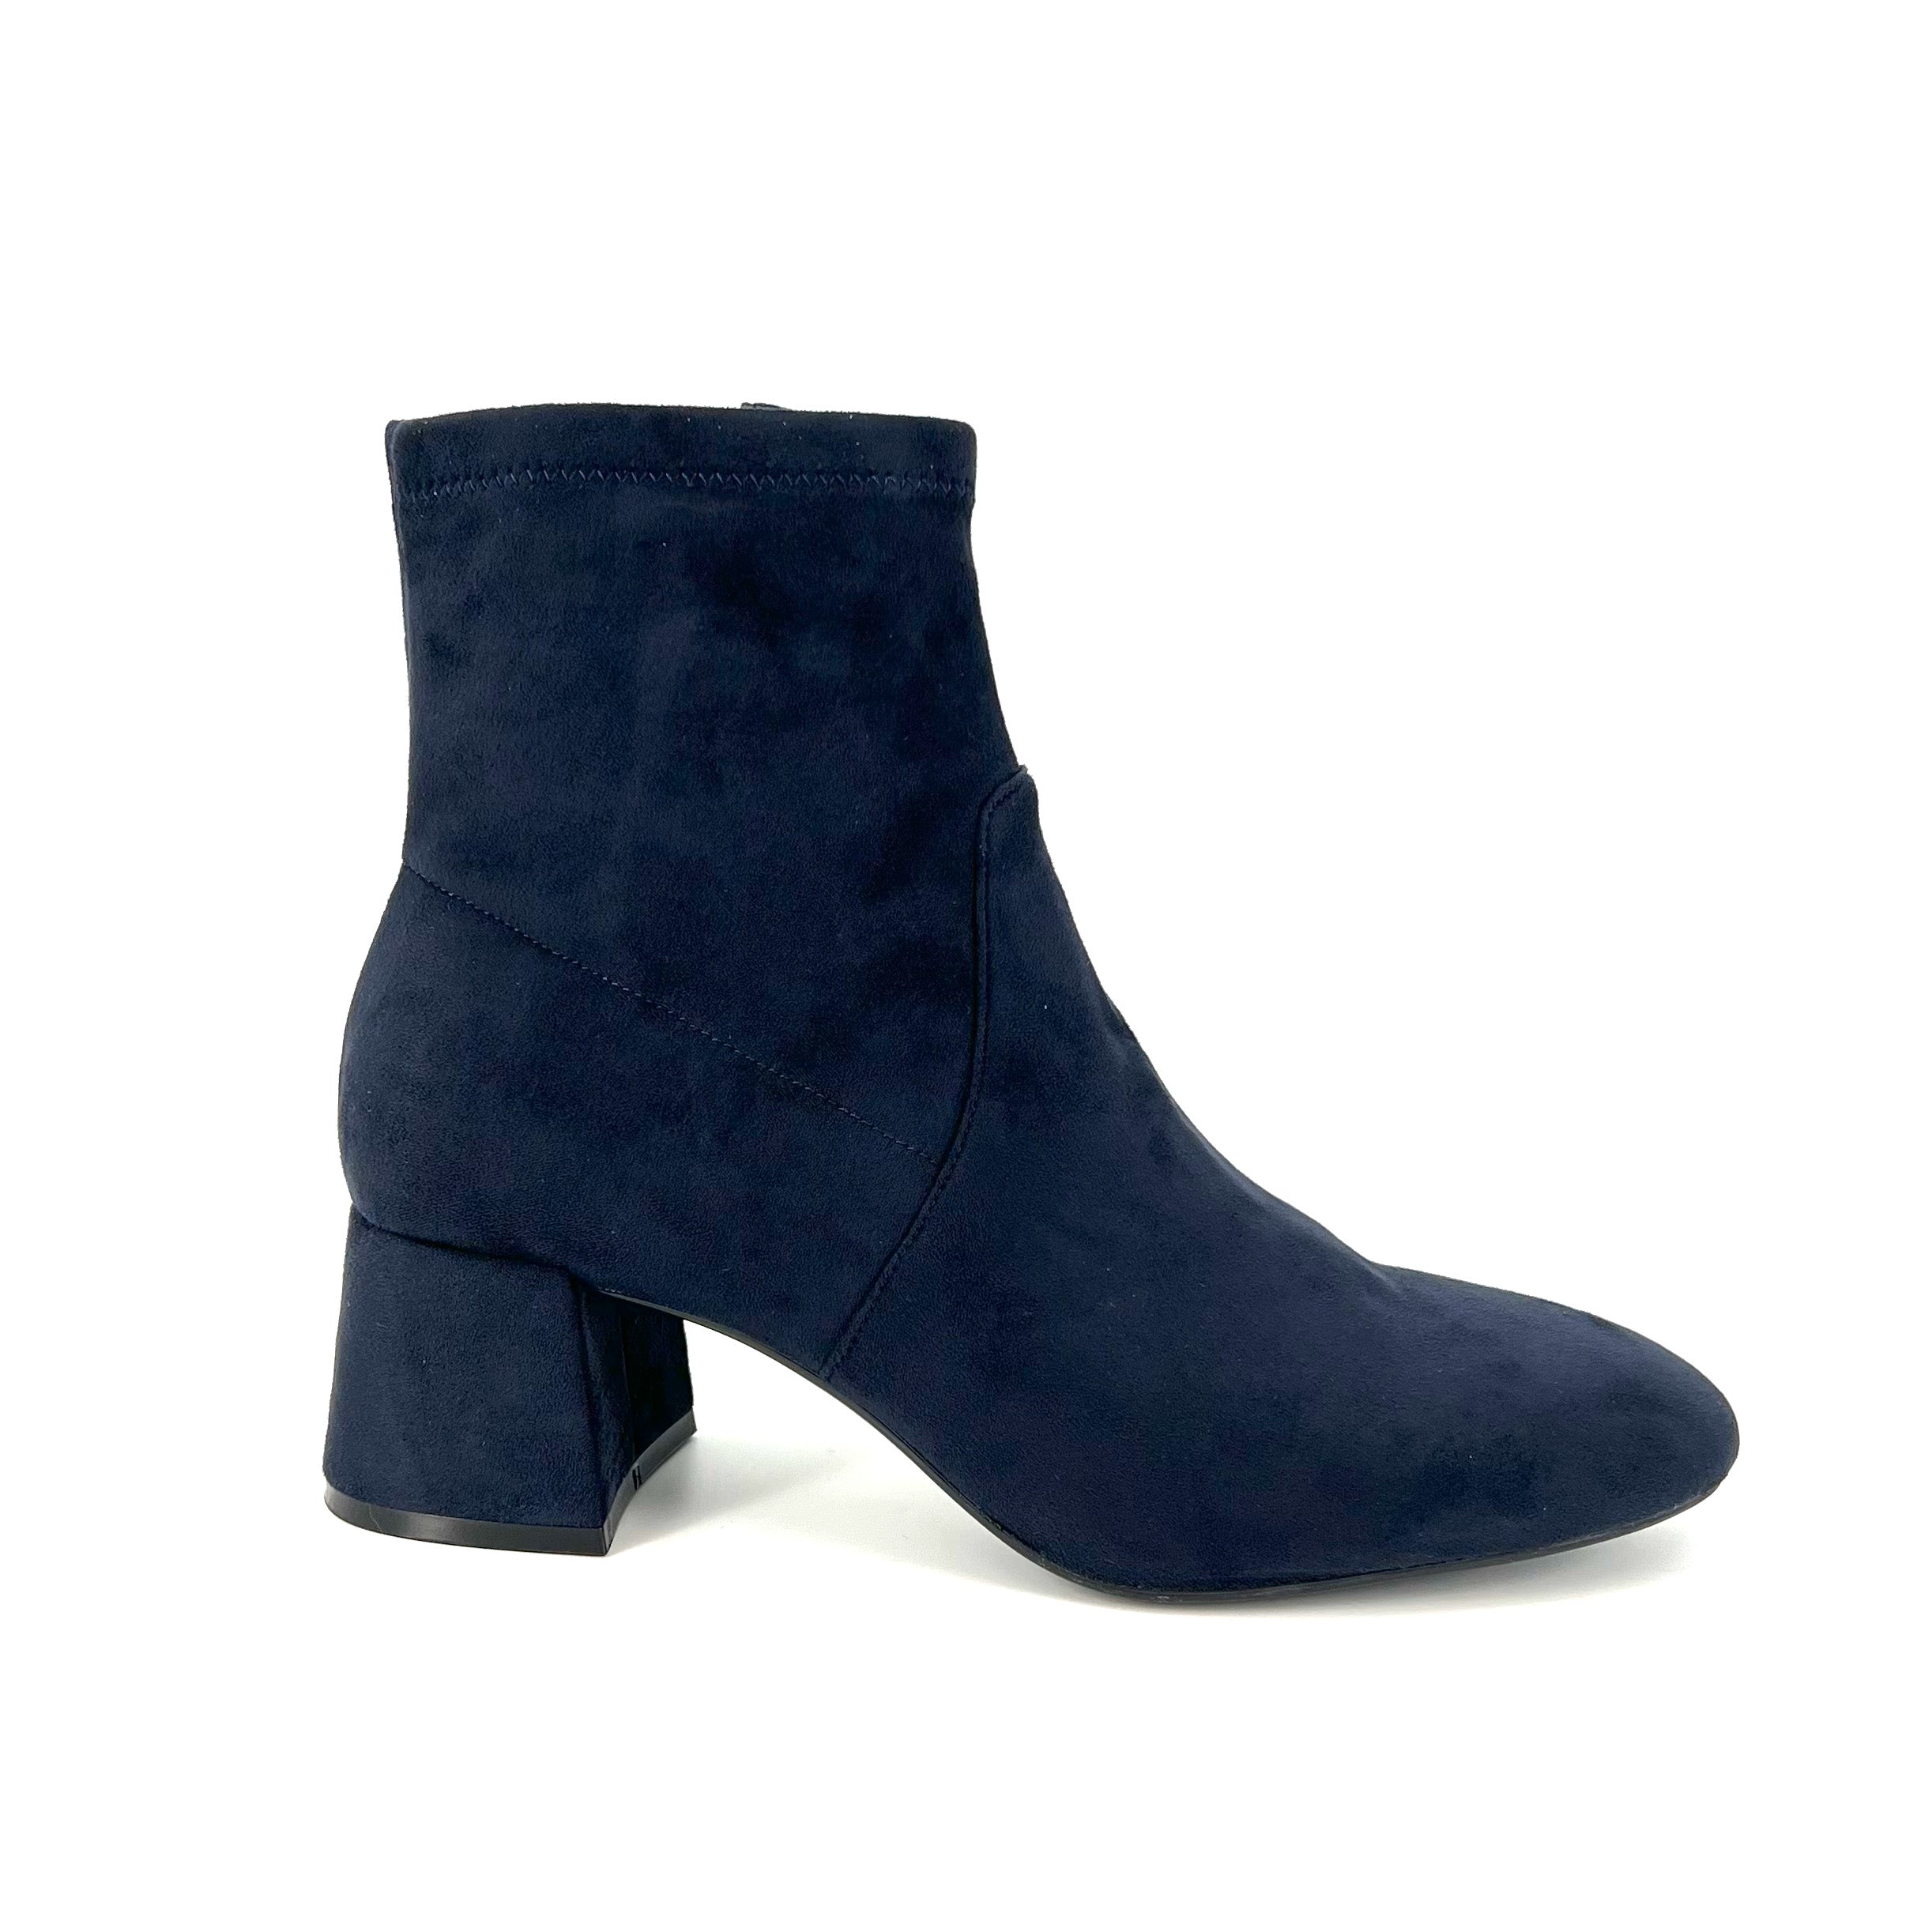 The Stretch Bootie with Inside Zip in Navy